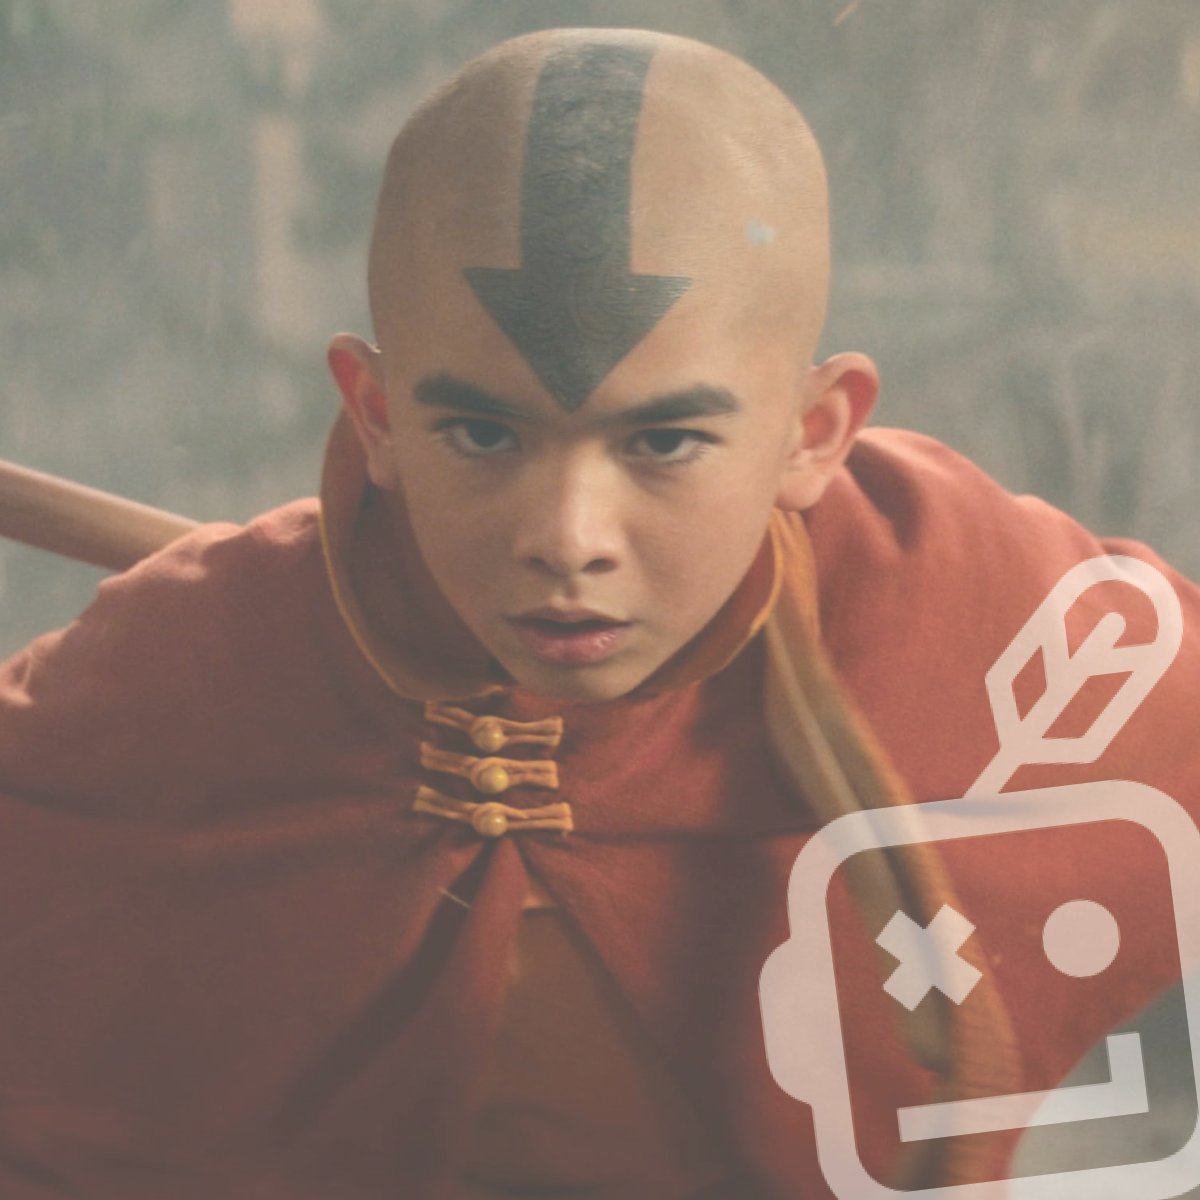 @netflix's AVATAR: THE LAST AIRBENDER (@AvatarNetflix ) has a plethora of Indigenous actors making the series a must-watch in NDN Country, says ATCG's Eli Funaro (@RANCORX)! ➡️ atribecalledgeek.com/the-new-avatar…

#AvatarTheLastAirbender #IndigenousRepresentation #NativesOnTV